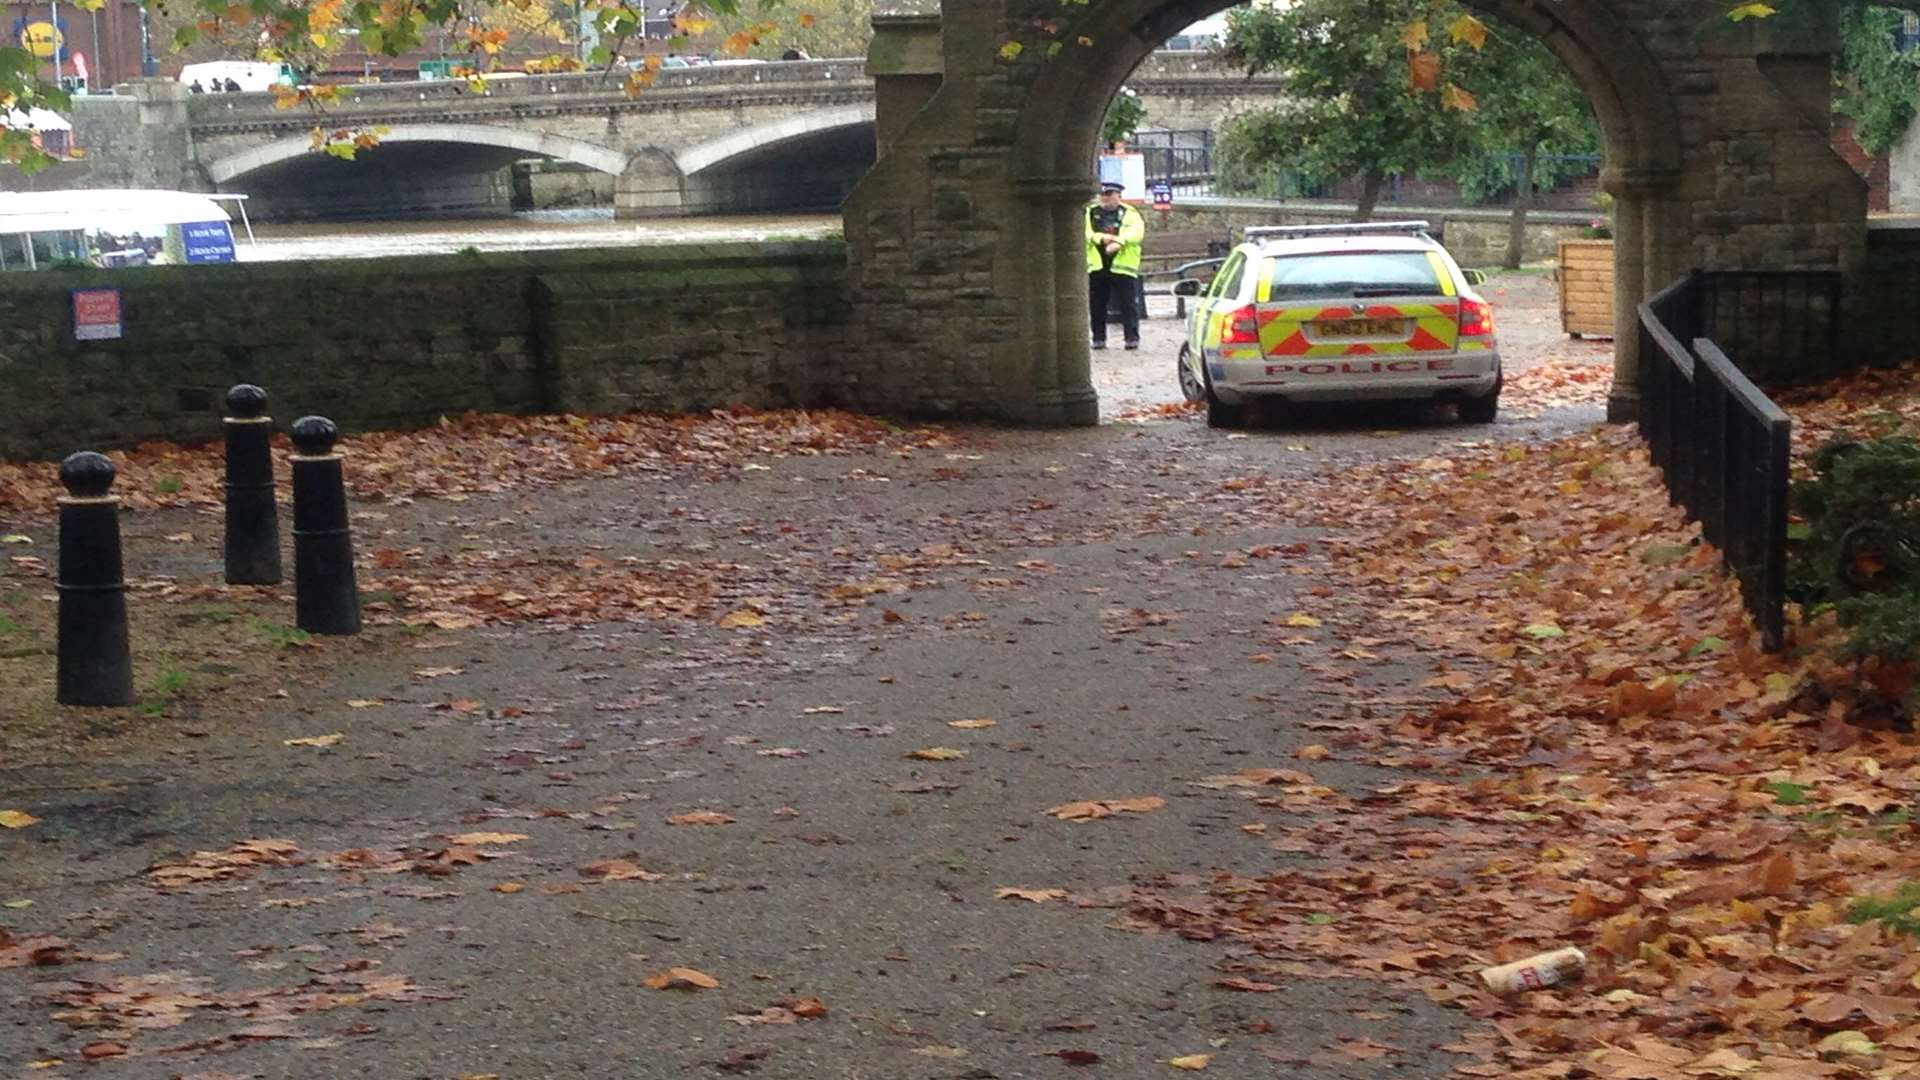 Parts of the river's edge were sealed off by police